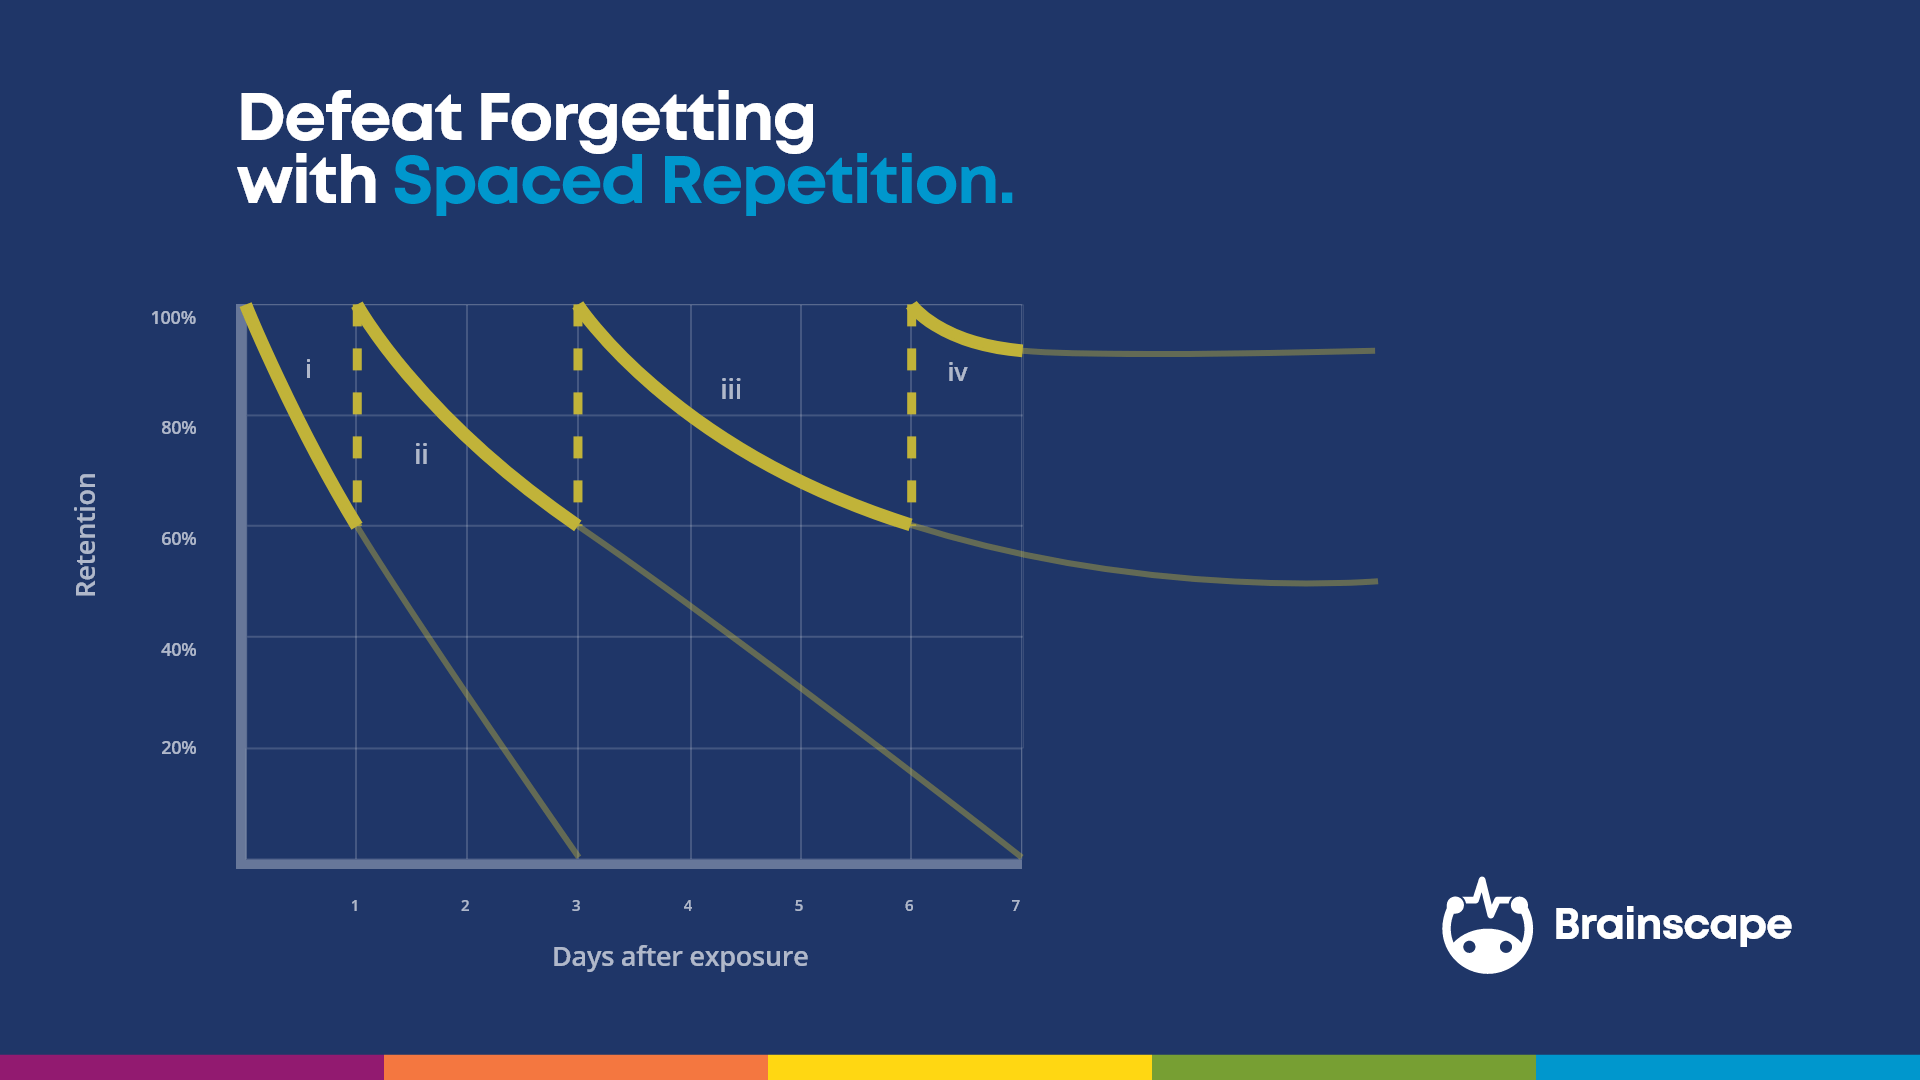 Brainscape uses spaced repetition to help you learn a language faster